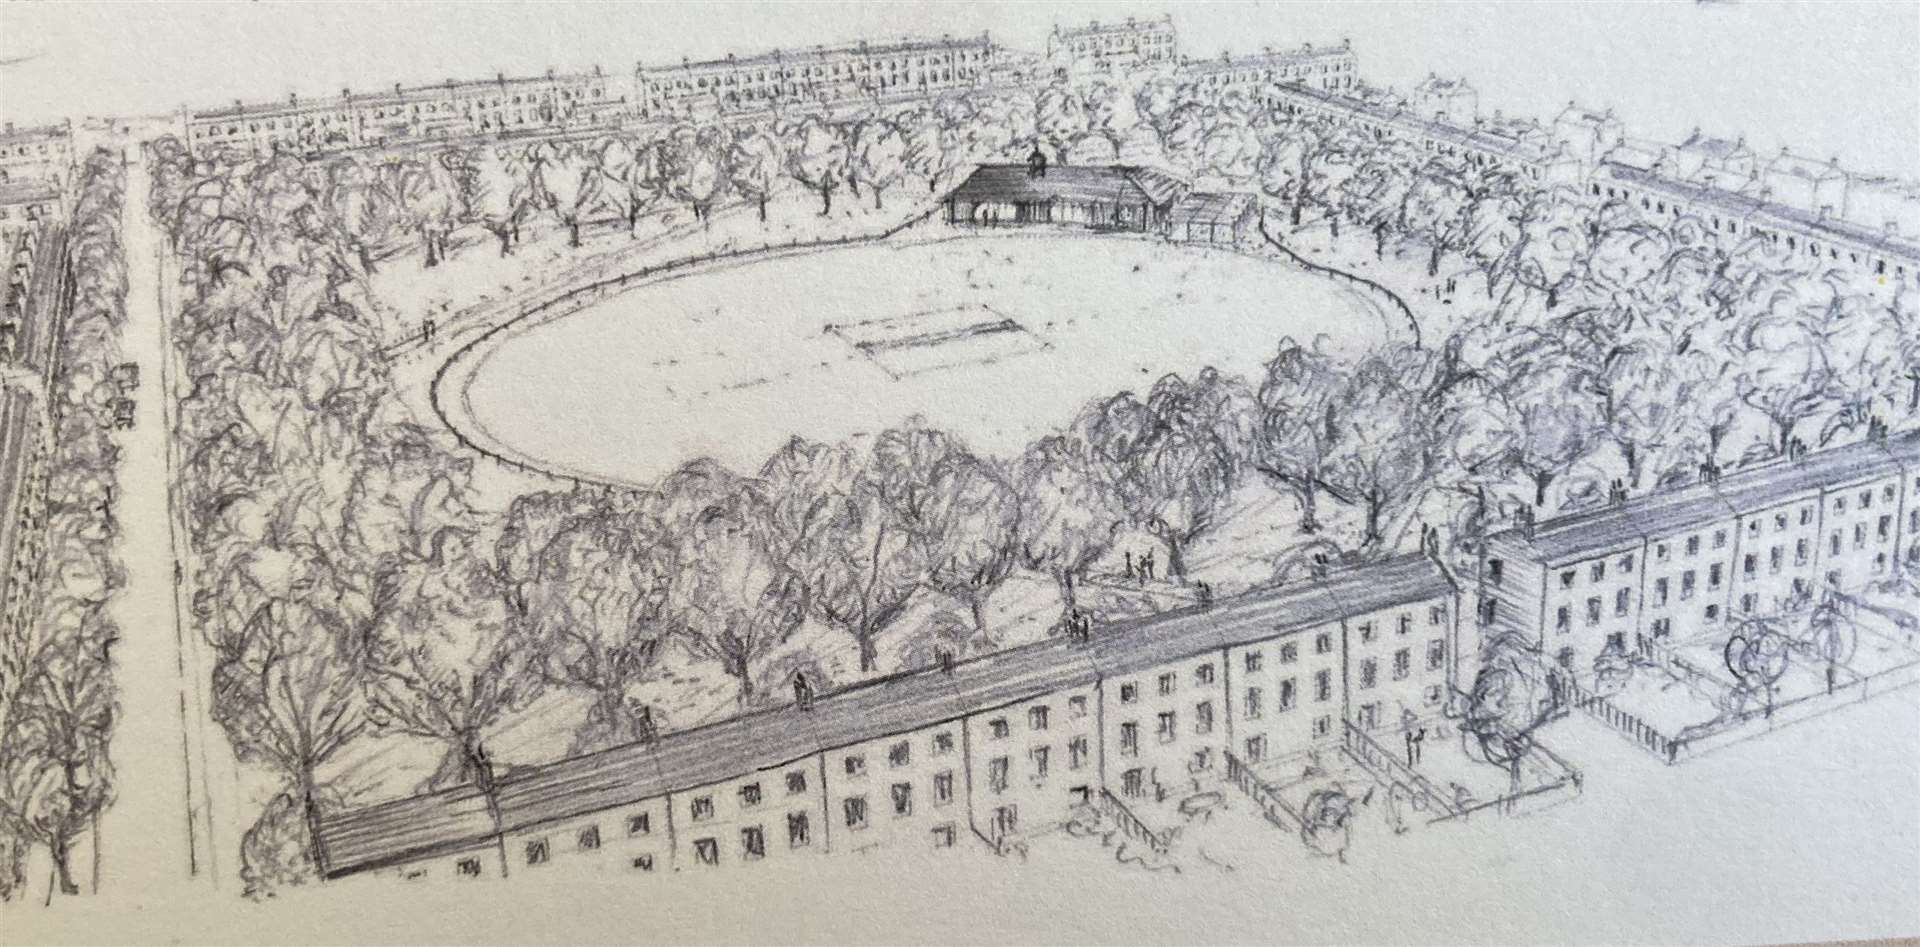 Drawing of central green and cricket pitch planned for Duchy of Cornwall development in Faversham